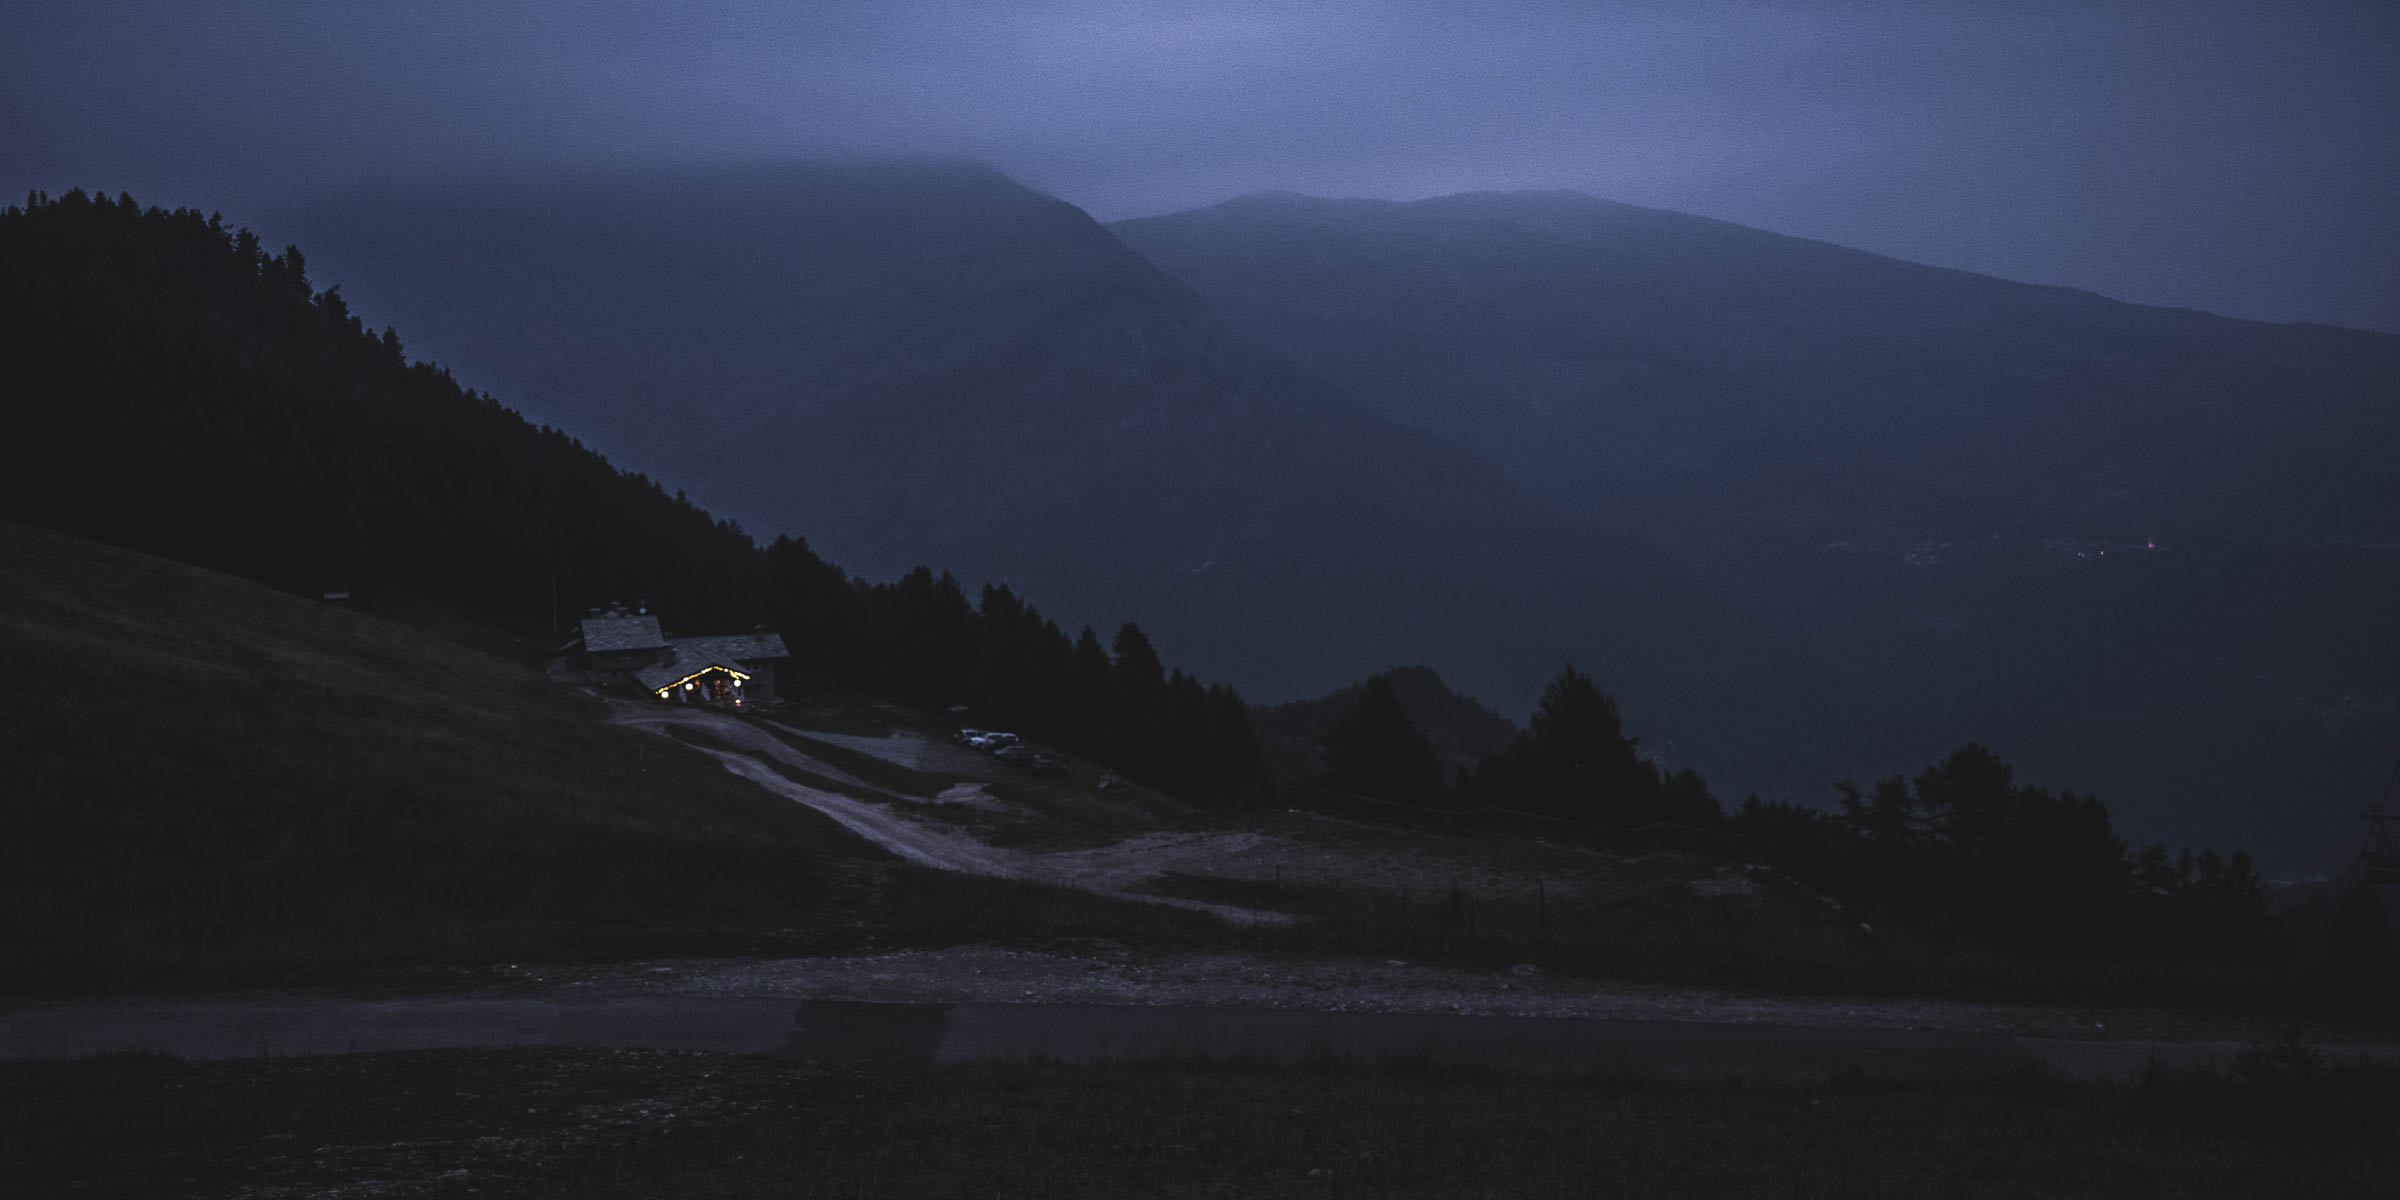 Looking down from Colle di Sampeyre after sunset with a refugio in sight